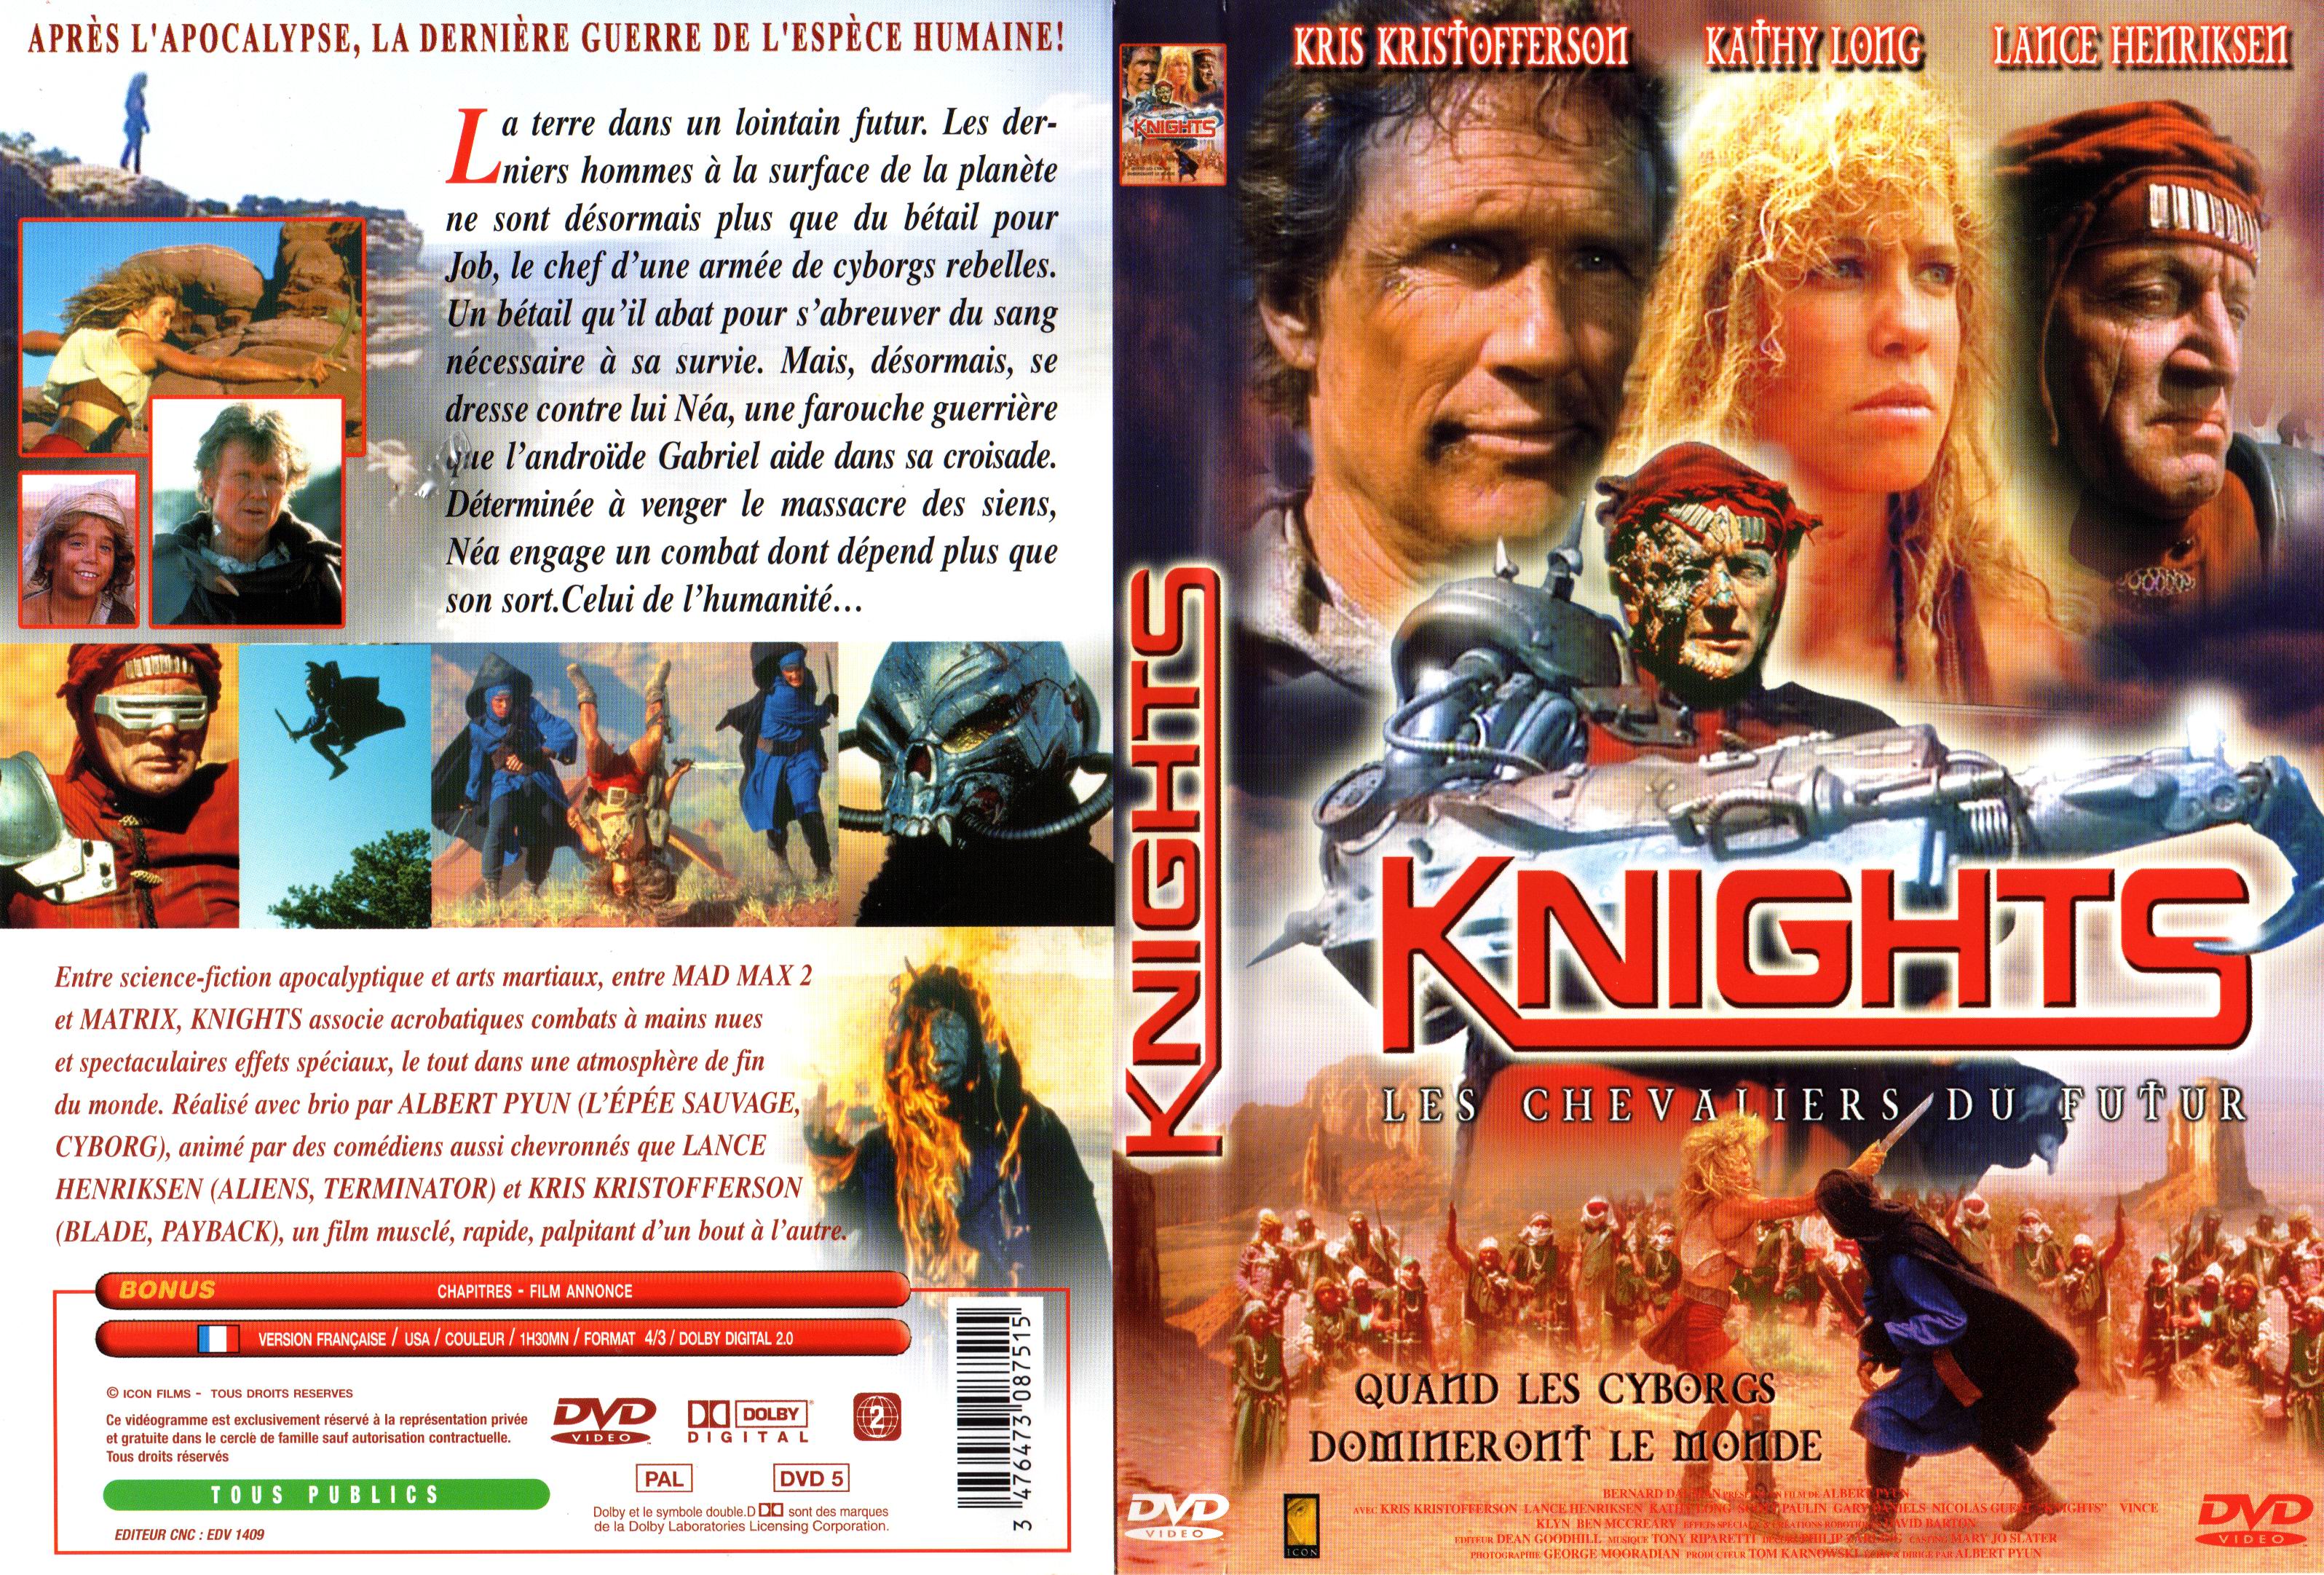 Jaquette DVD Knights